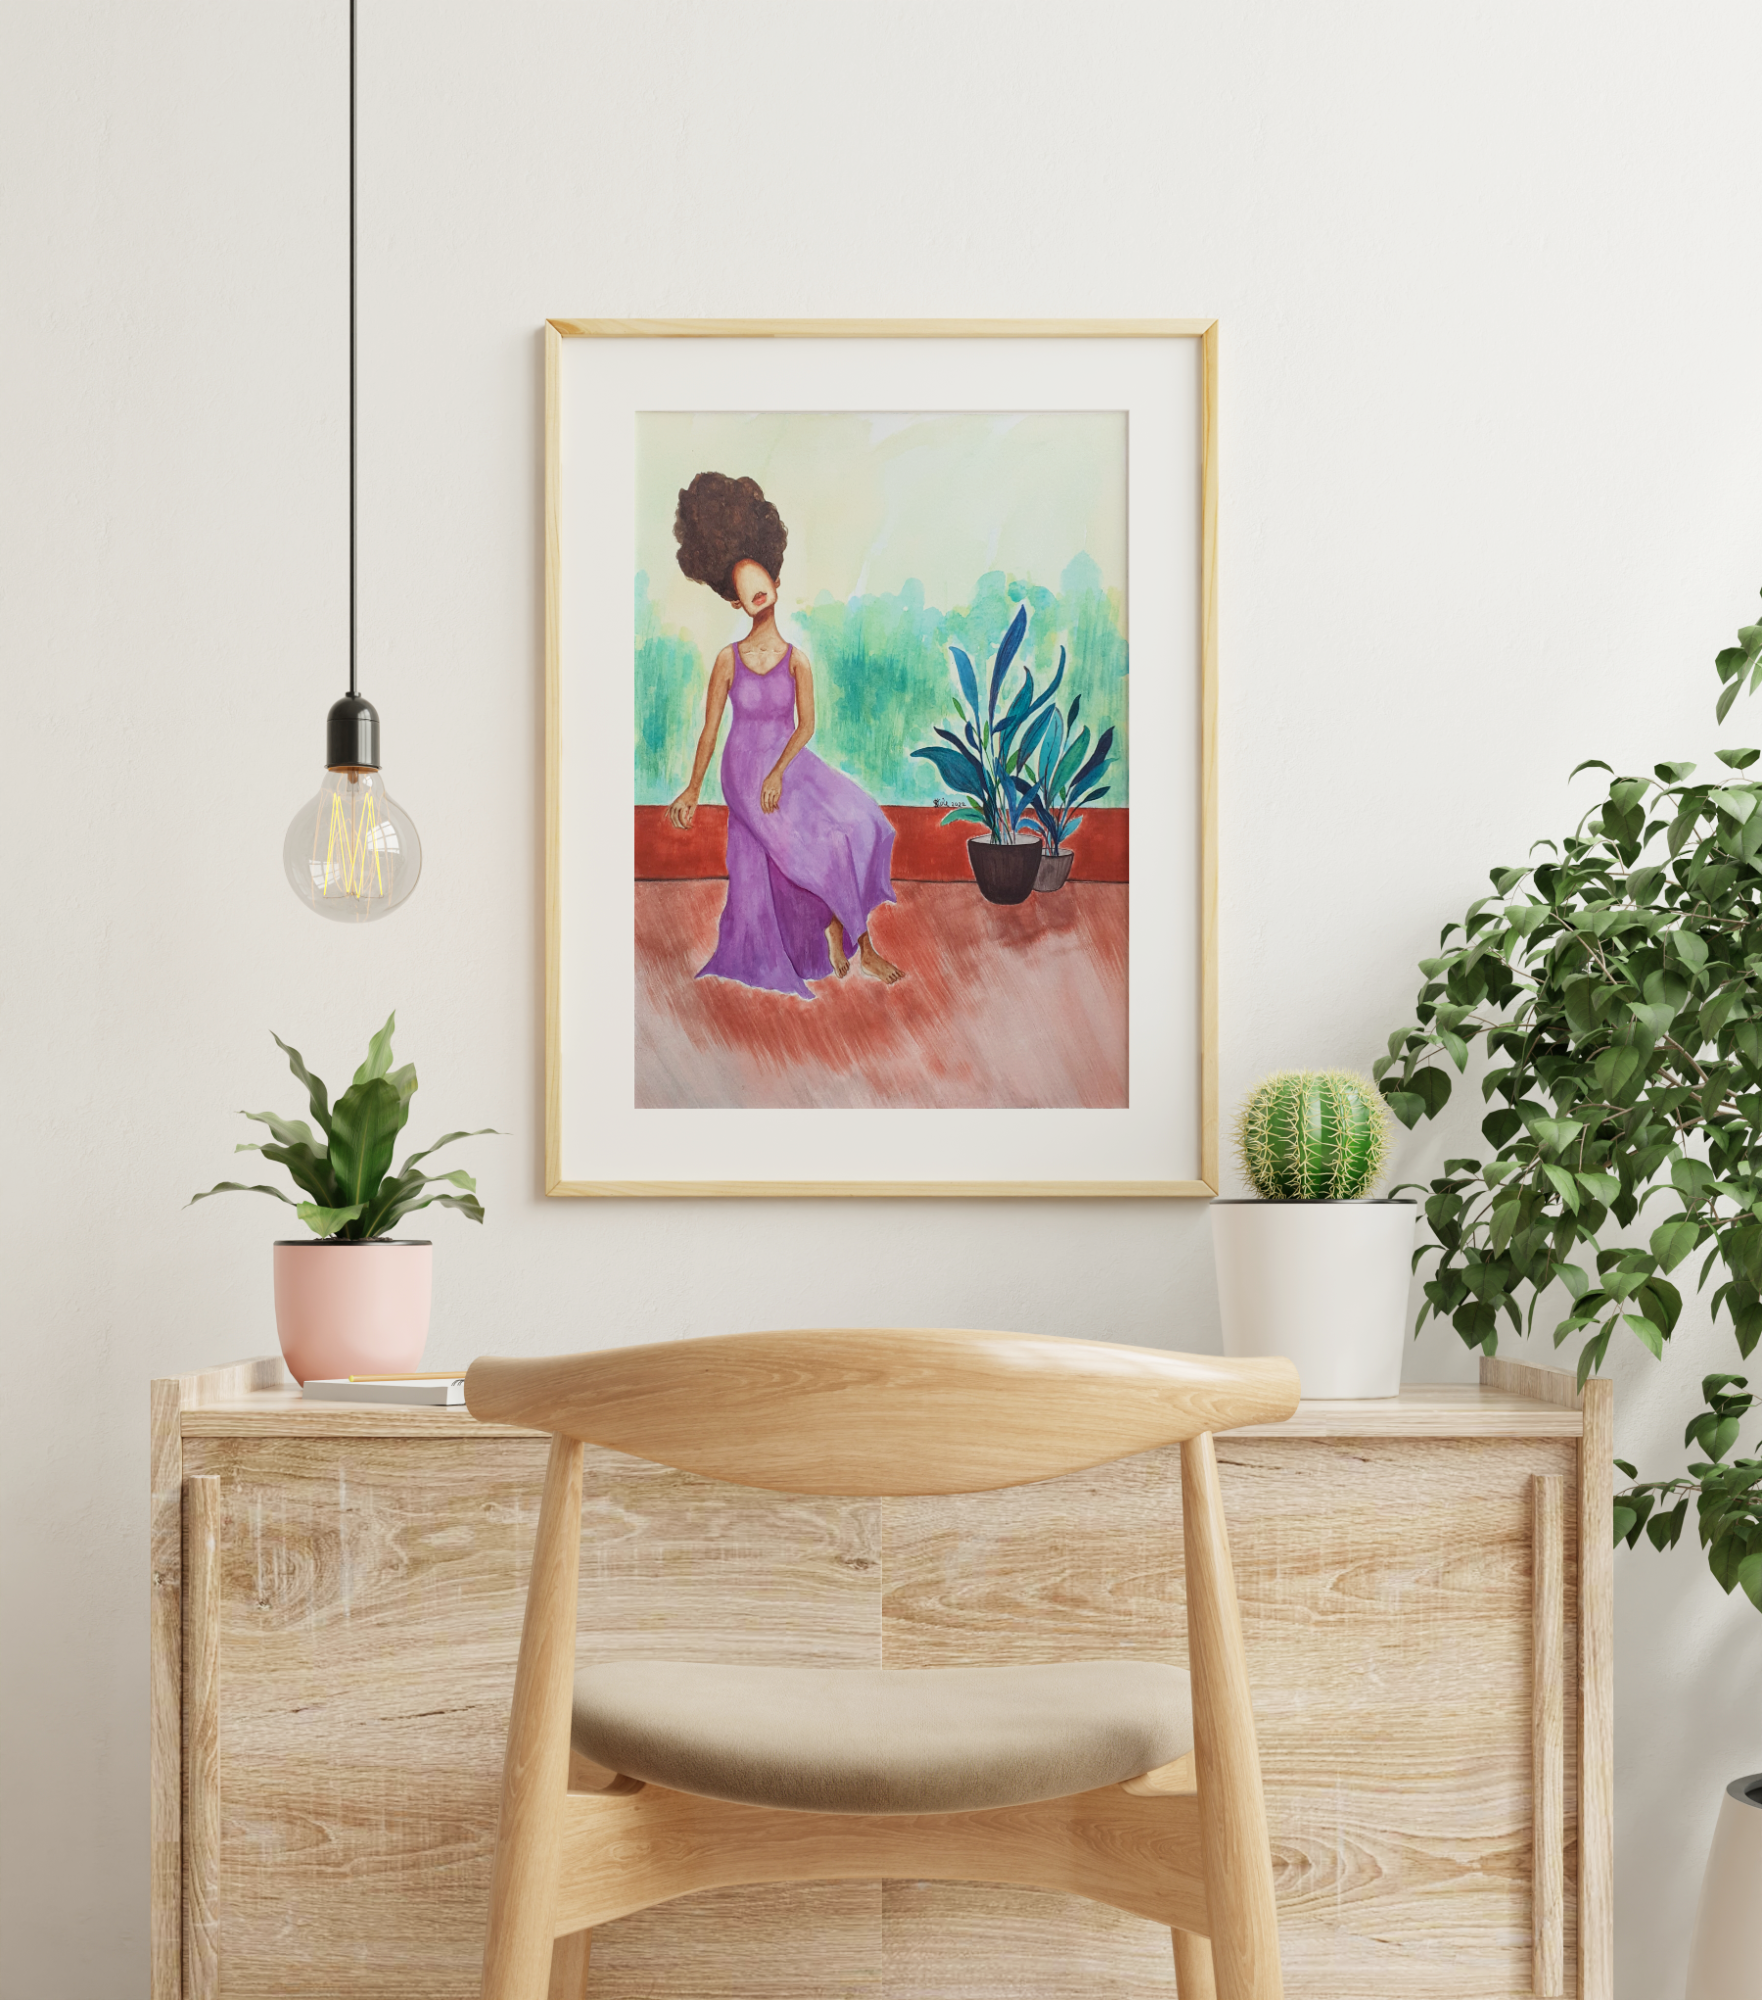 'Joyful Morning' Original Watercolour Figurative Painting by Stacey-Ann Cole